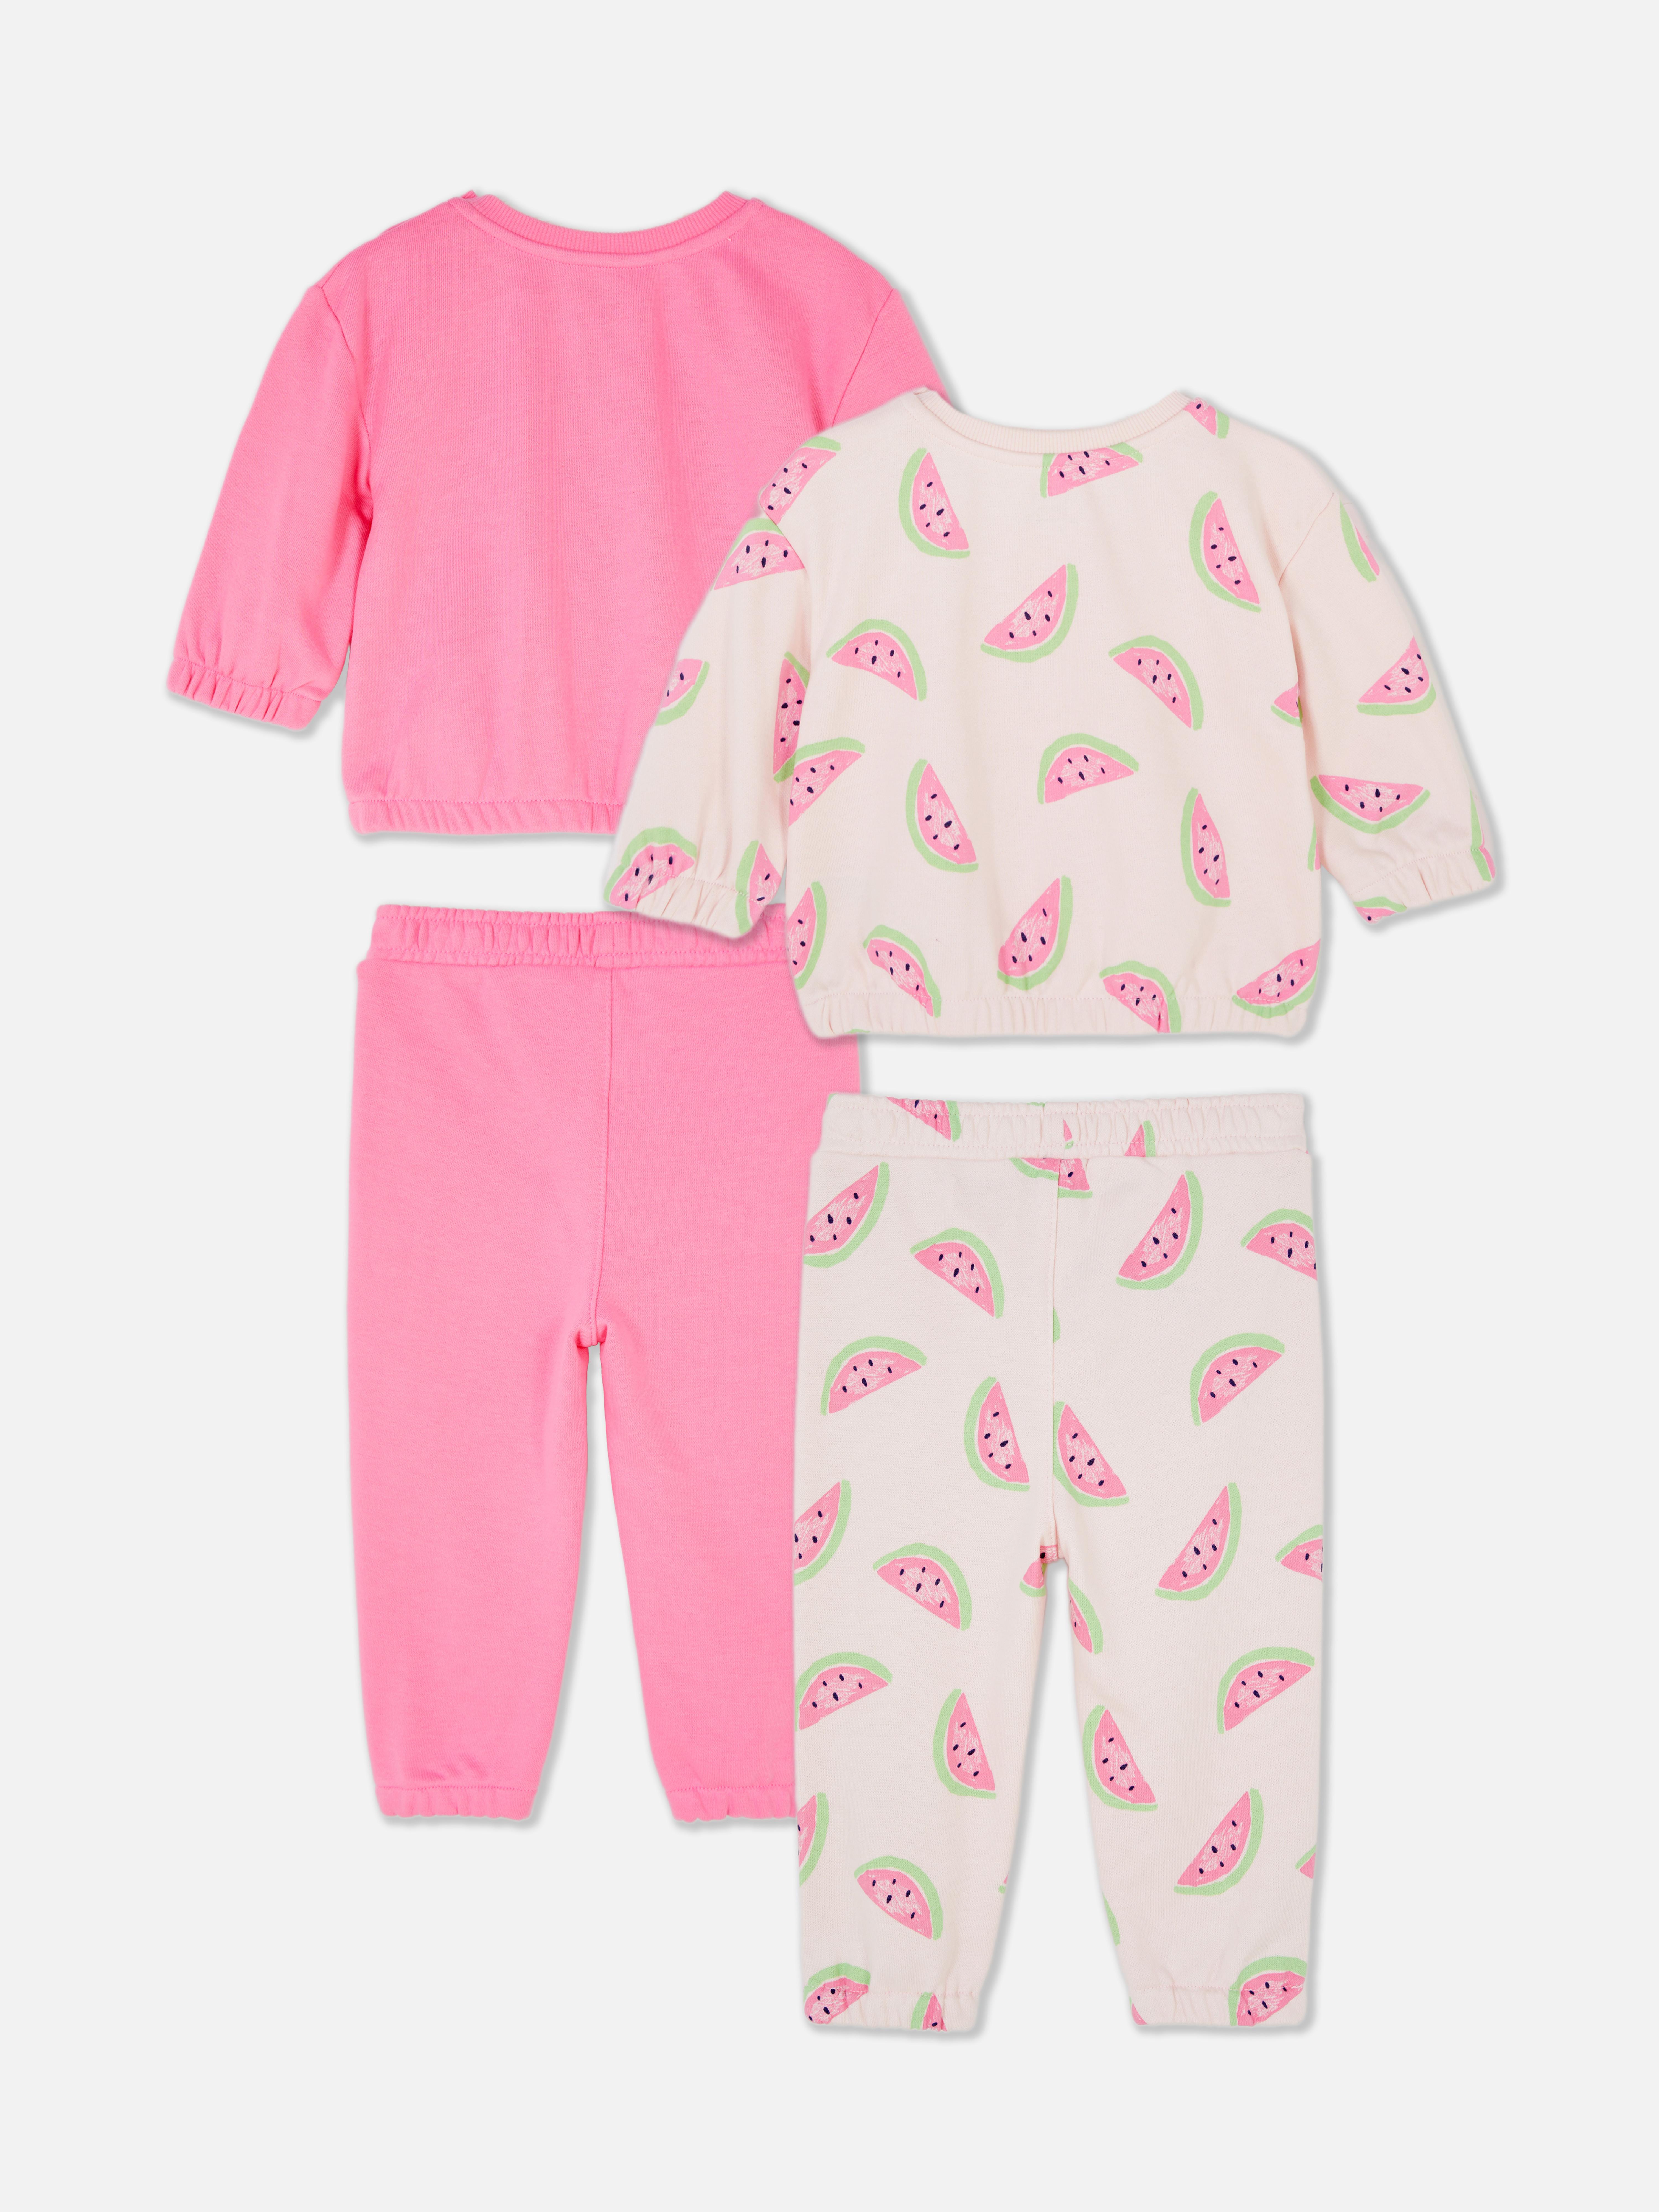 Primark - OMG! These sweet sets are mix'n'match and start at just